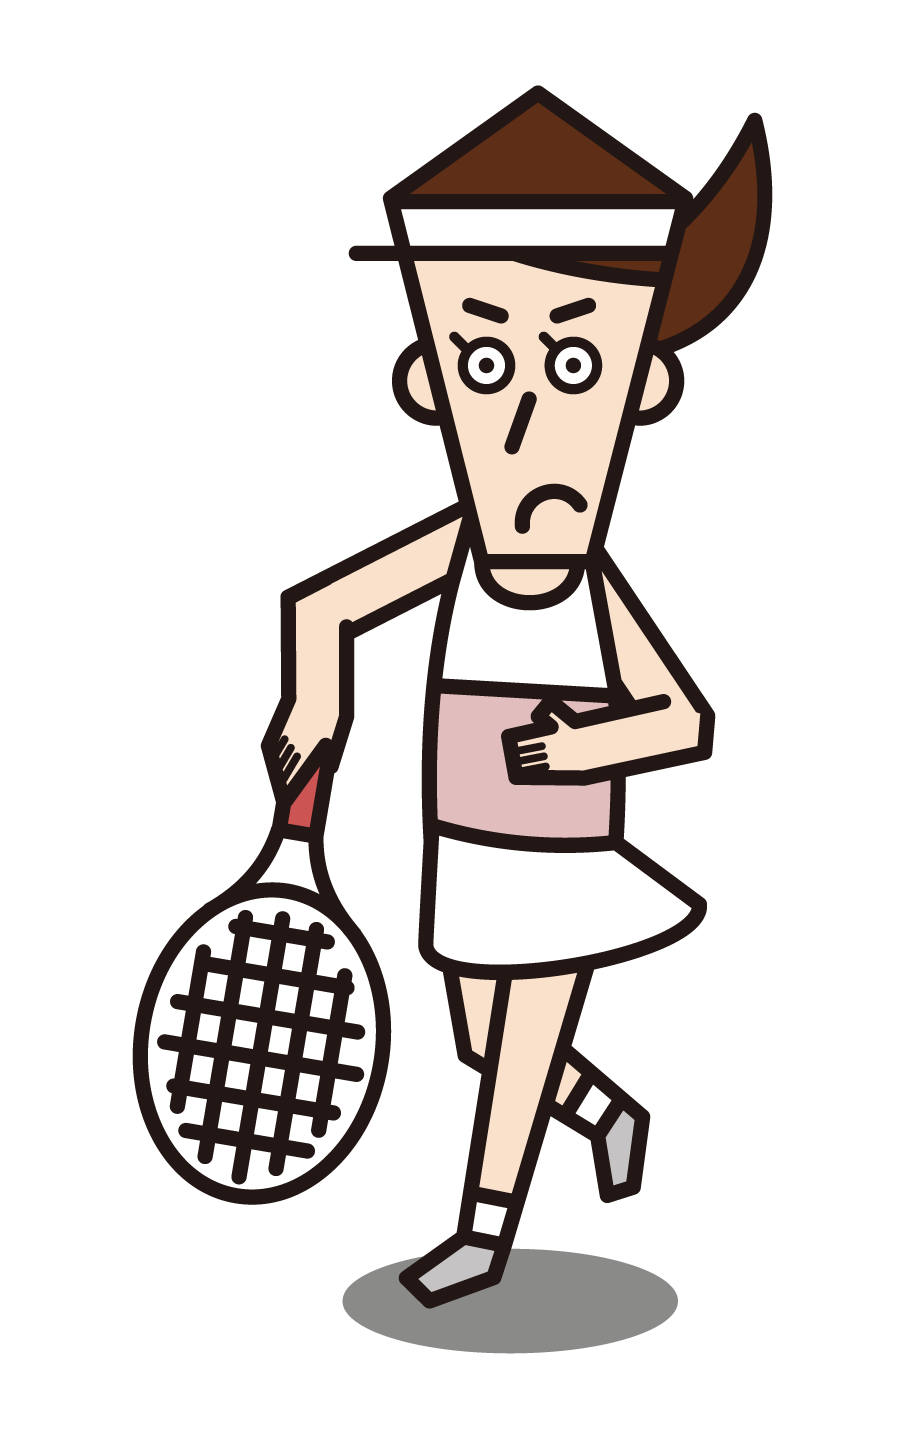 Illustration of a tennis player (female) who hits a serve